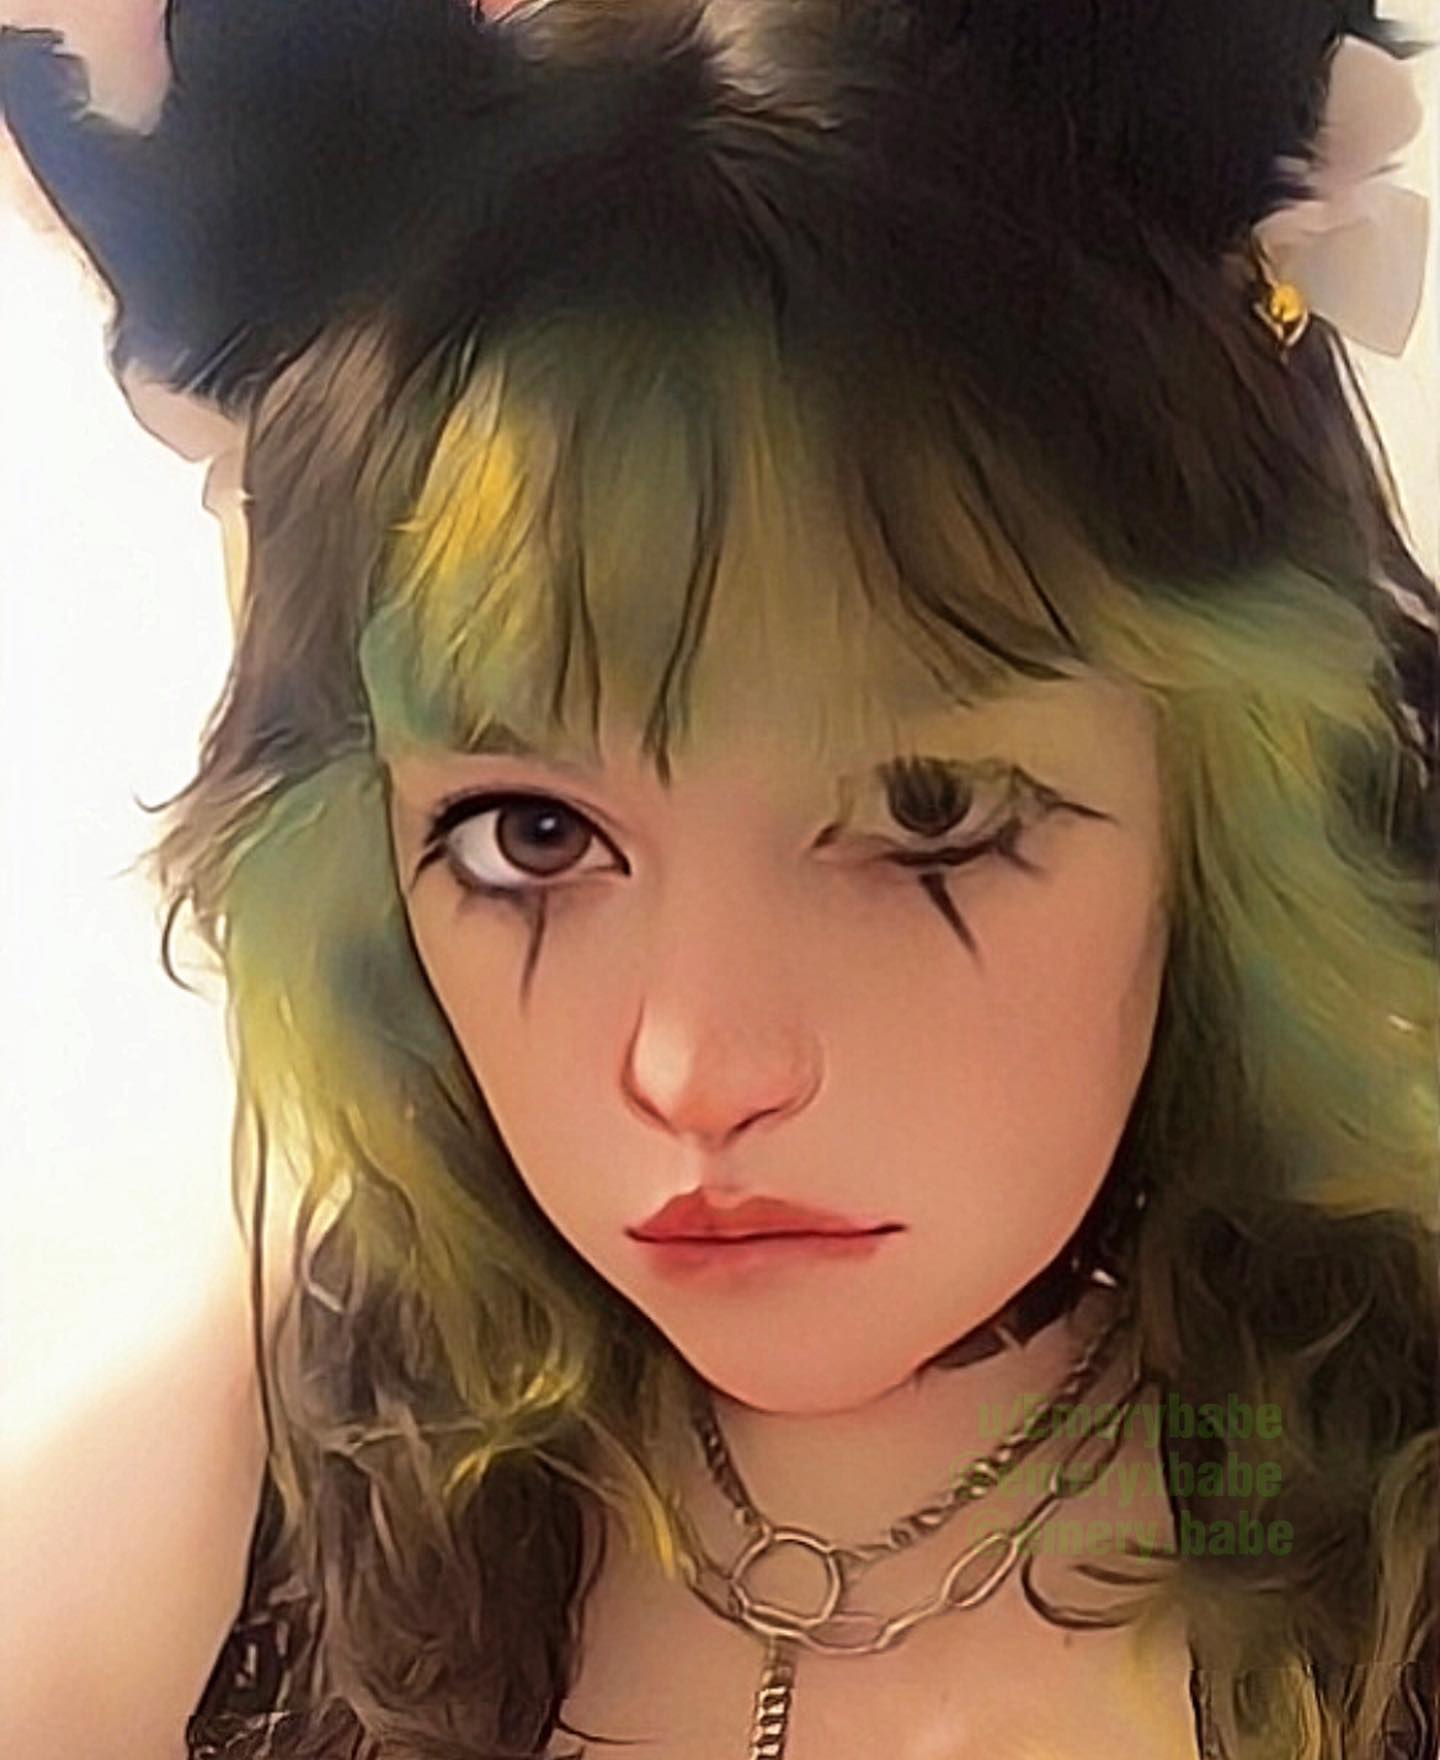 uWu 😝😂🤢 

Which games should I play when I stream??? Loving this all so much 😍❤️ thank you for the continued support

Loved these pics and how cute with the manga filter, nothing better than anime and “hanging out” 😘🥵

Emerybabe ❤️❤️

#goththot #animegirl #egirl #catgirl #onlyfans #onlyfansmodel #gothmom #mommy #thotpatrol